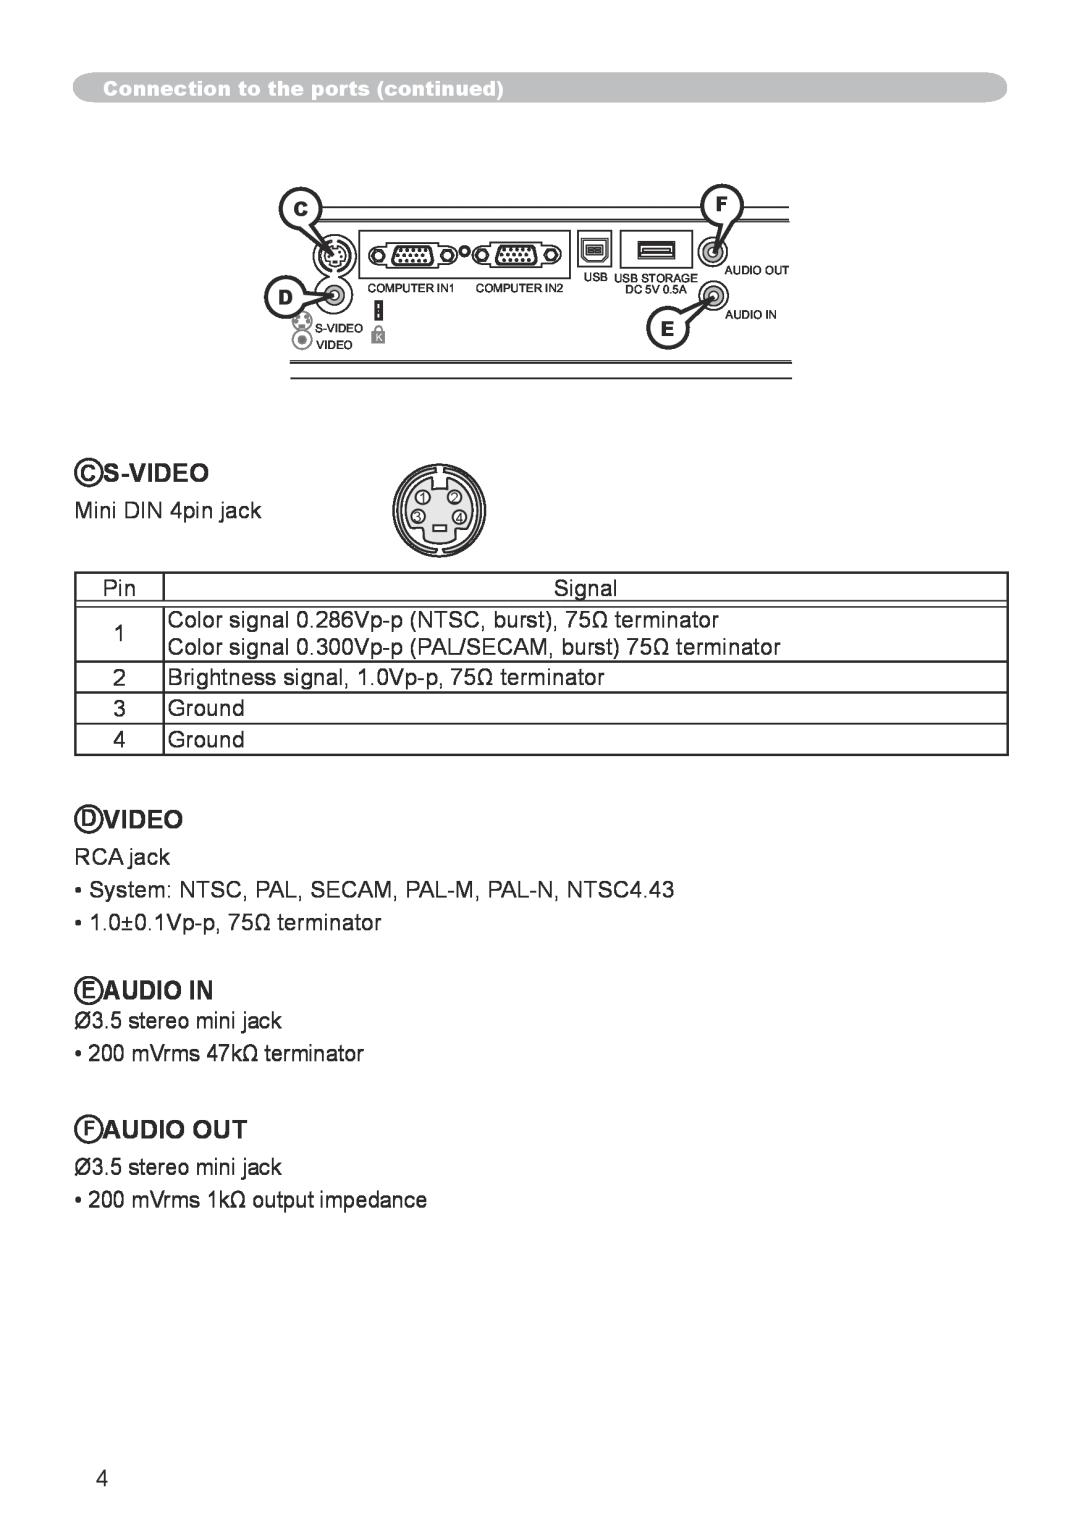 Dukane 8786 user manual C S-Video, D Video, E Audio In, F Audio Out, Connection to the ports continued 